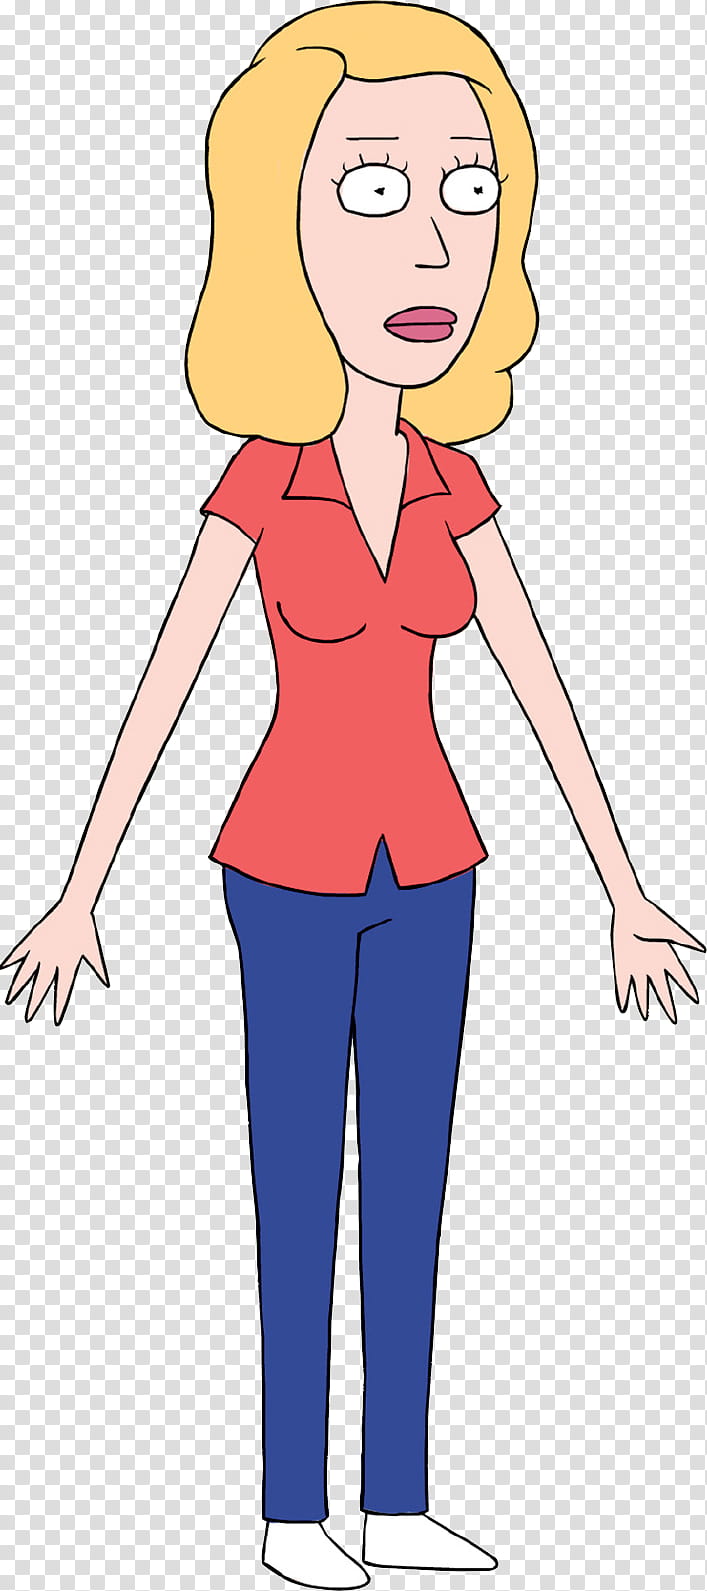 Rick and Morty HQ Resource , Rick and Morty female character illustration transparent background PNG clipart